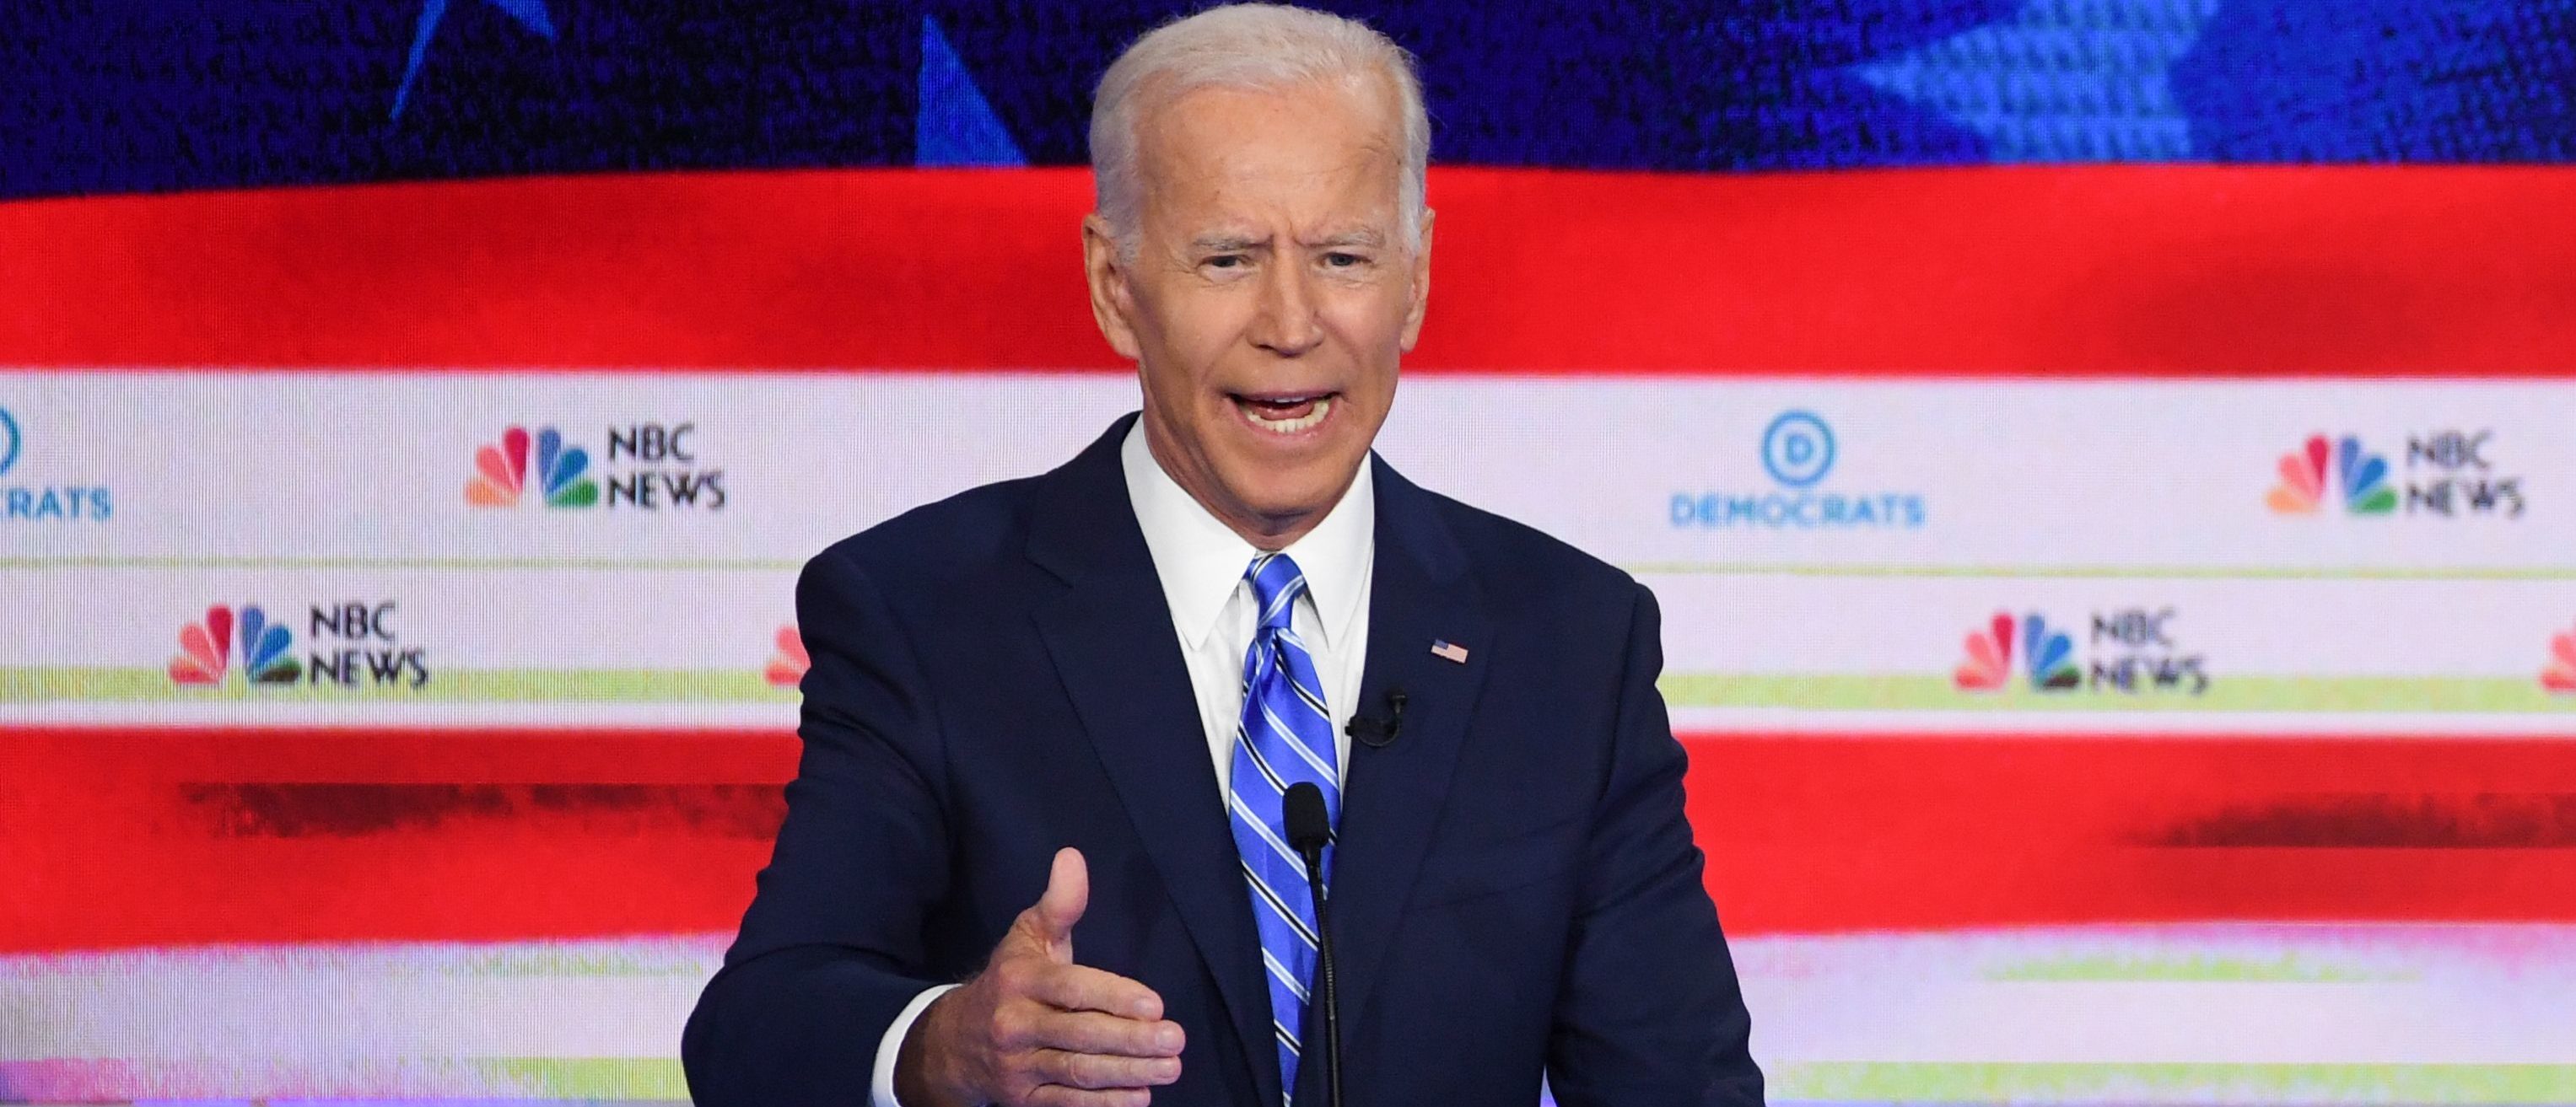 Democratic presidential hopeful Former US Vice President Joseph R. Biden participates in the second Democratic primary debate of the 2020 presidential campaign season hosted by NBC News at the Adrienne Arsht Center for the Performing Arts in Miami, Florida, June 27, 2019. (Photo by SAUL LOEB / AFP) (Photo credit should read SAUL LOEB/AFP via Getty Images)